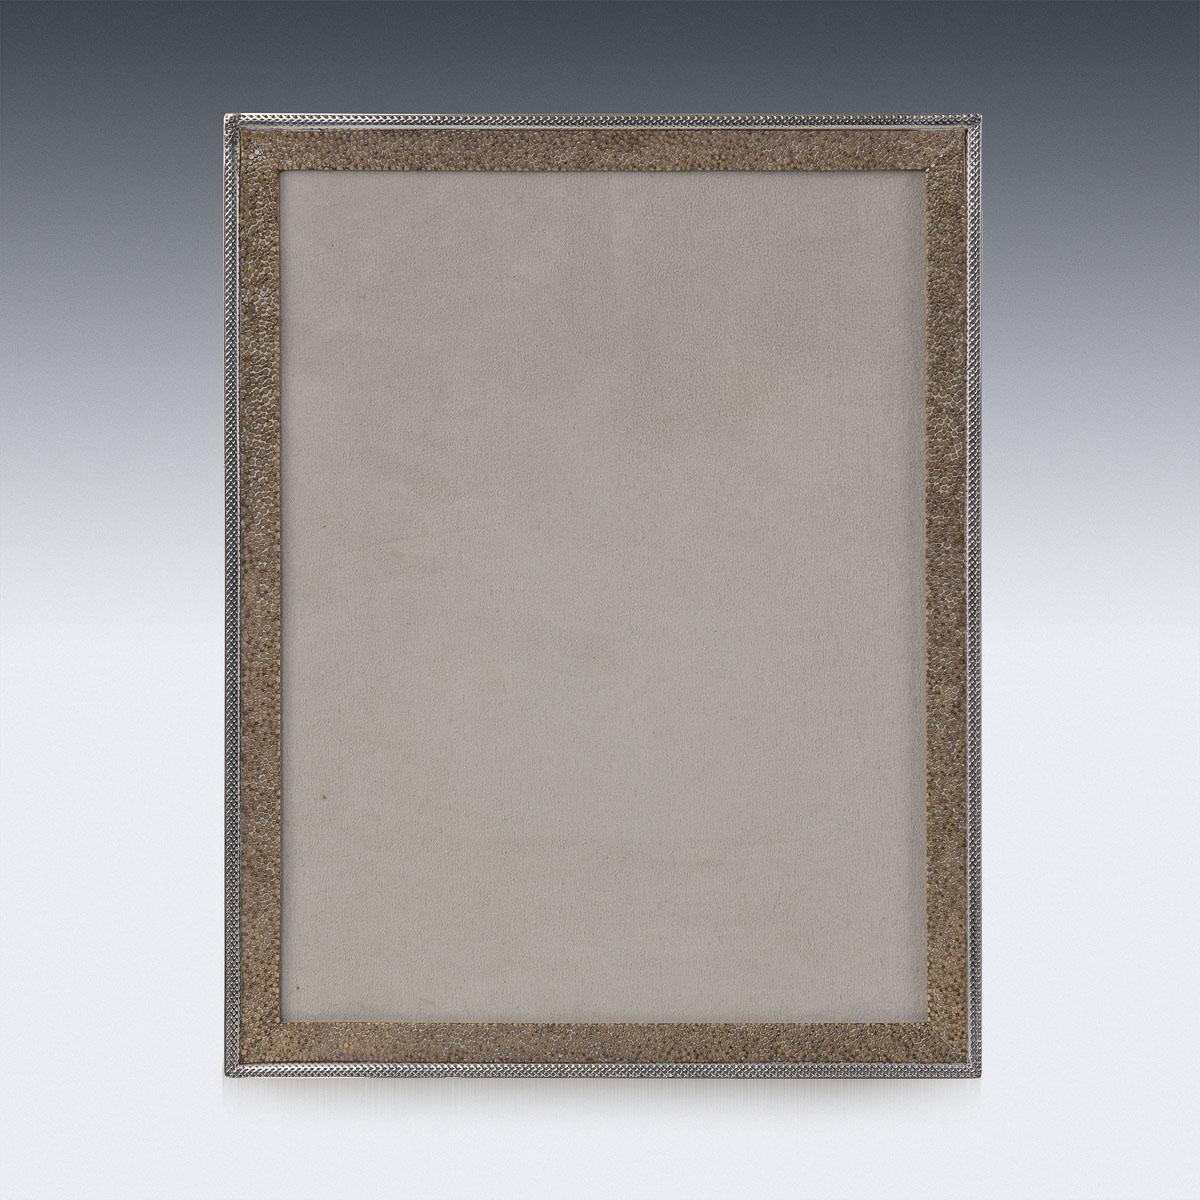 20th century British made silver & shagreen photograph frame, of rectangular form, covered behind glass and on a strut support. Hallmarked English silver (925 standard), Chester, year 1911 (L), Maker Stokes & Ireland Ltd (William Henry Stokes &